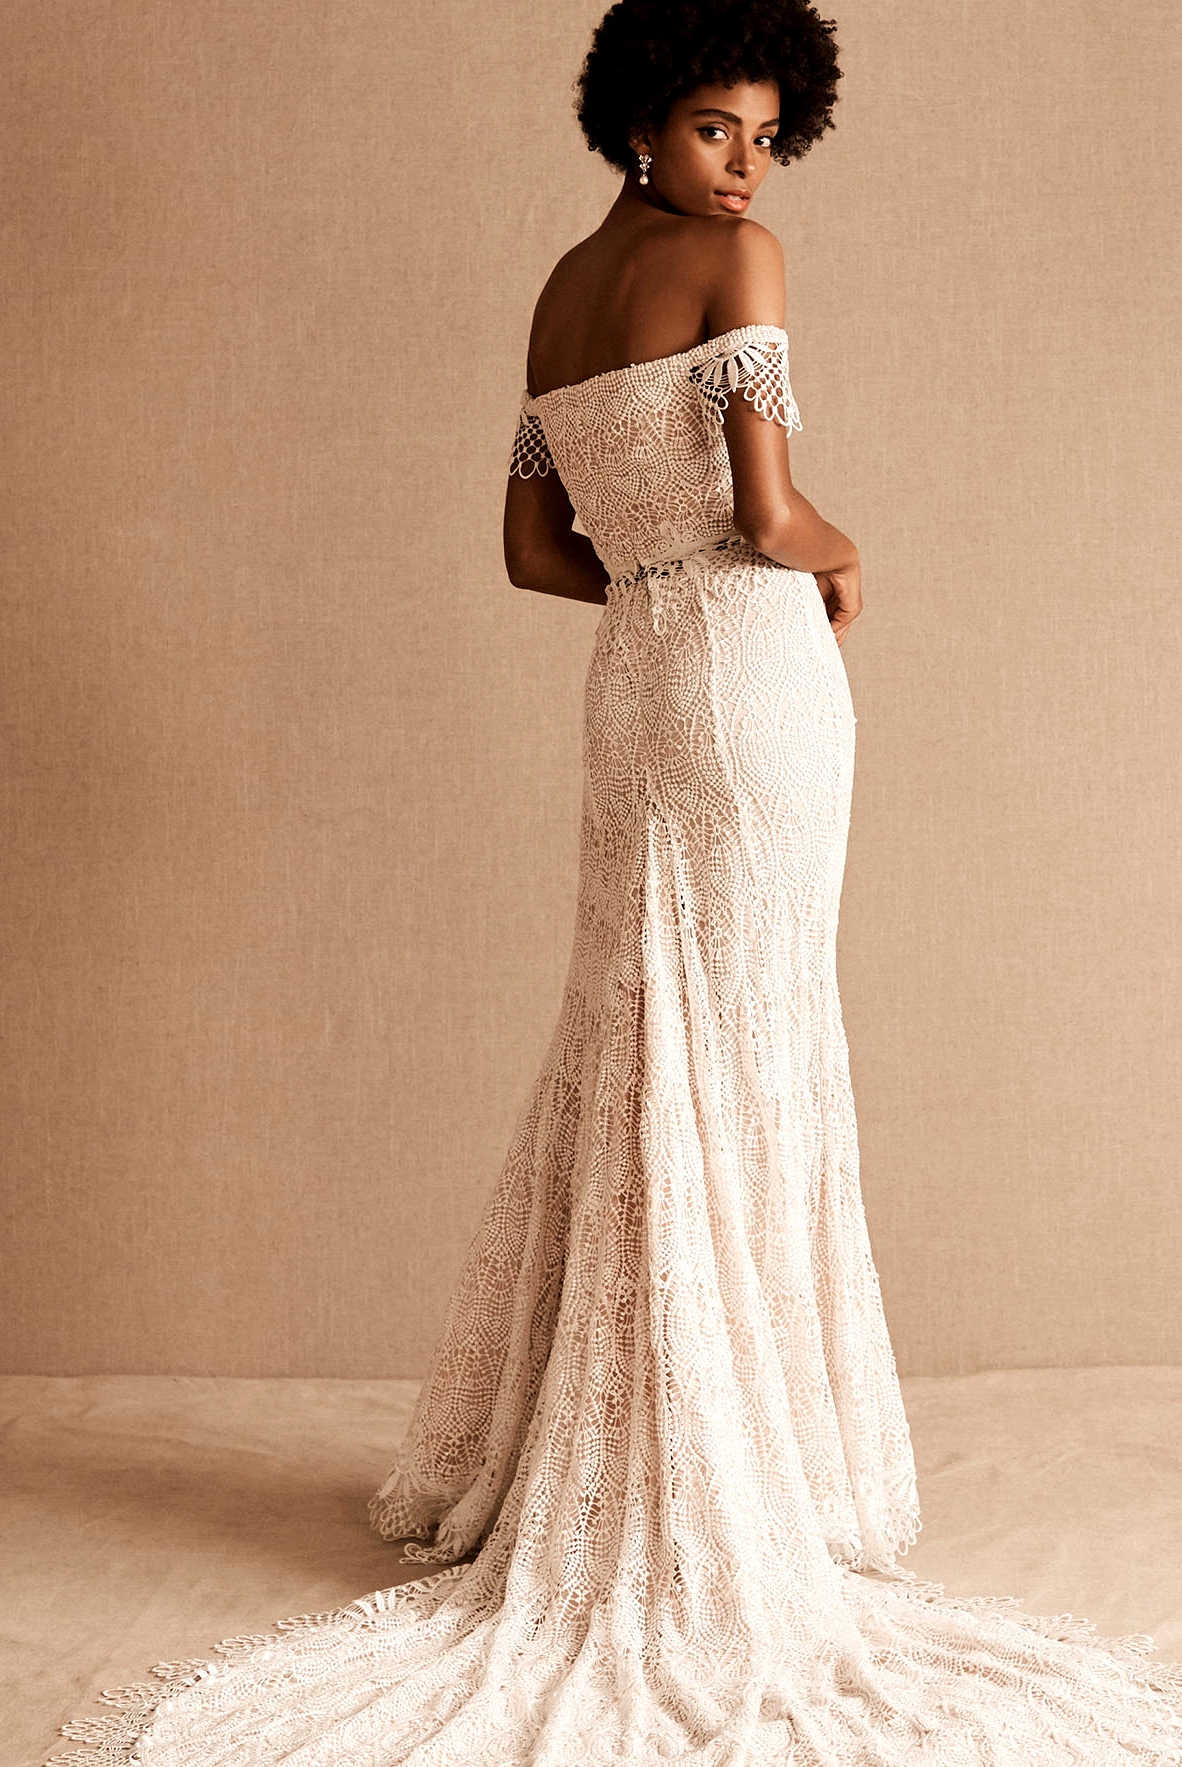 Daughters of Simone Ophelia Gown from BHLDN